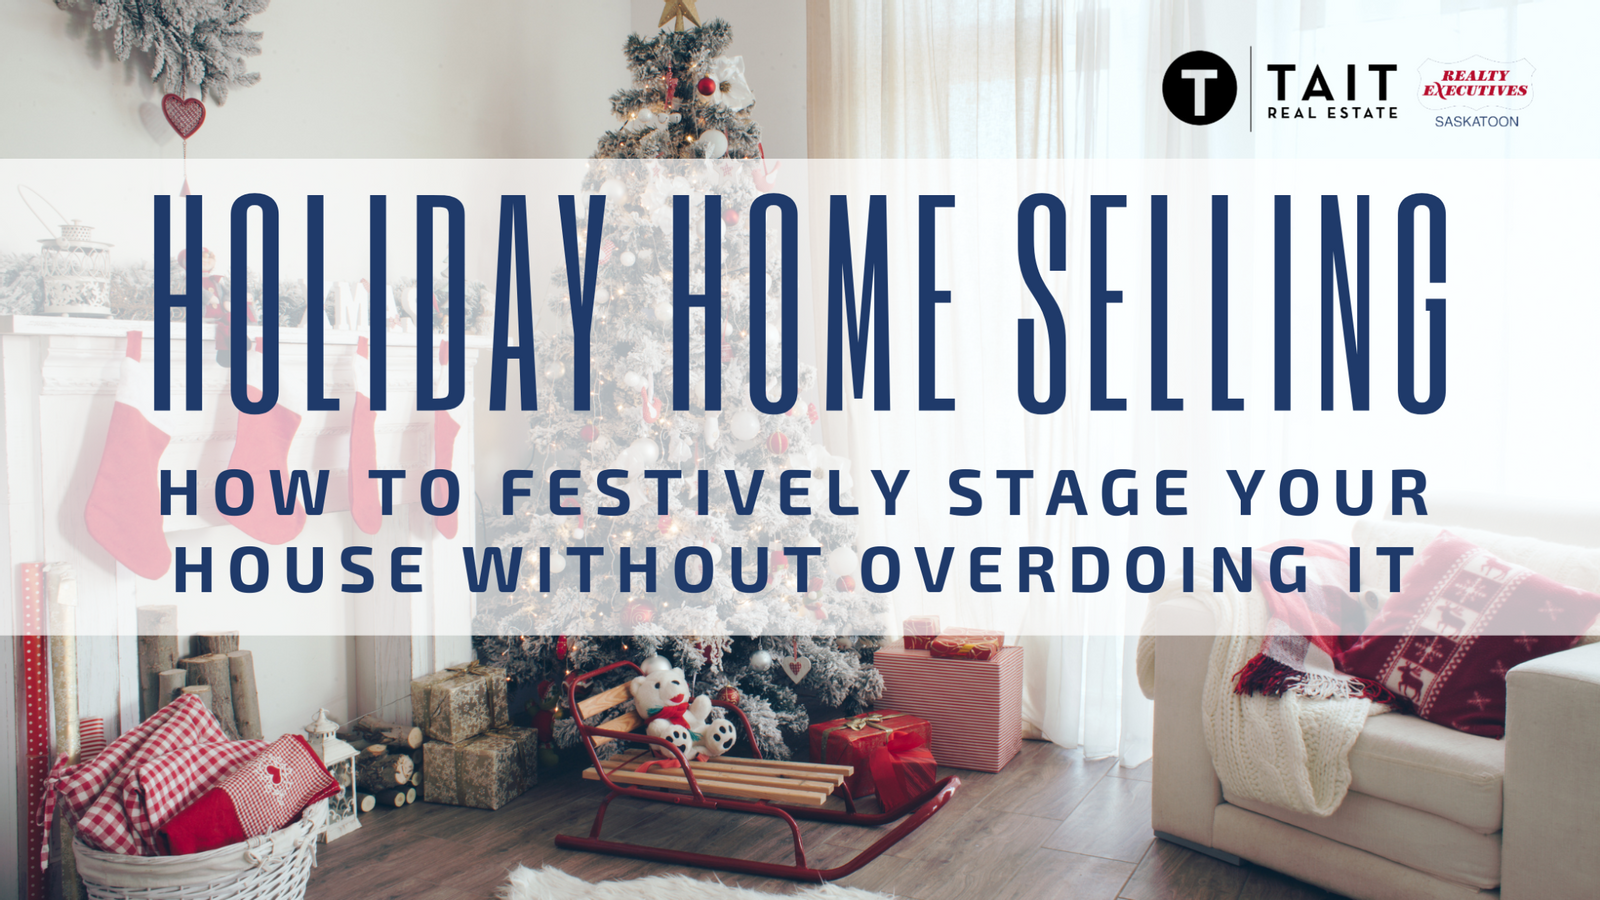 Holiday Home Selling: How to Festively Stage Your House Without Overdoing It